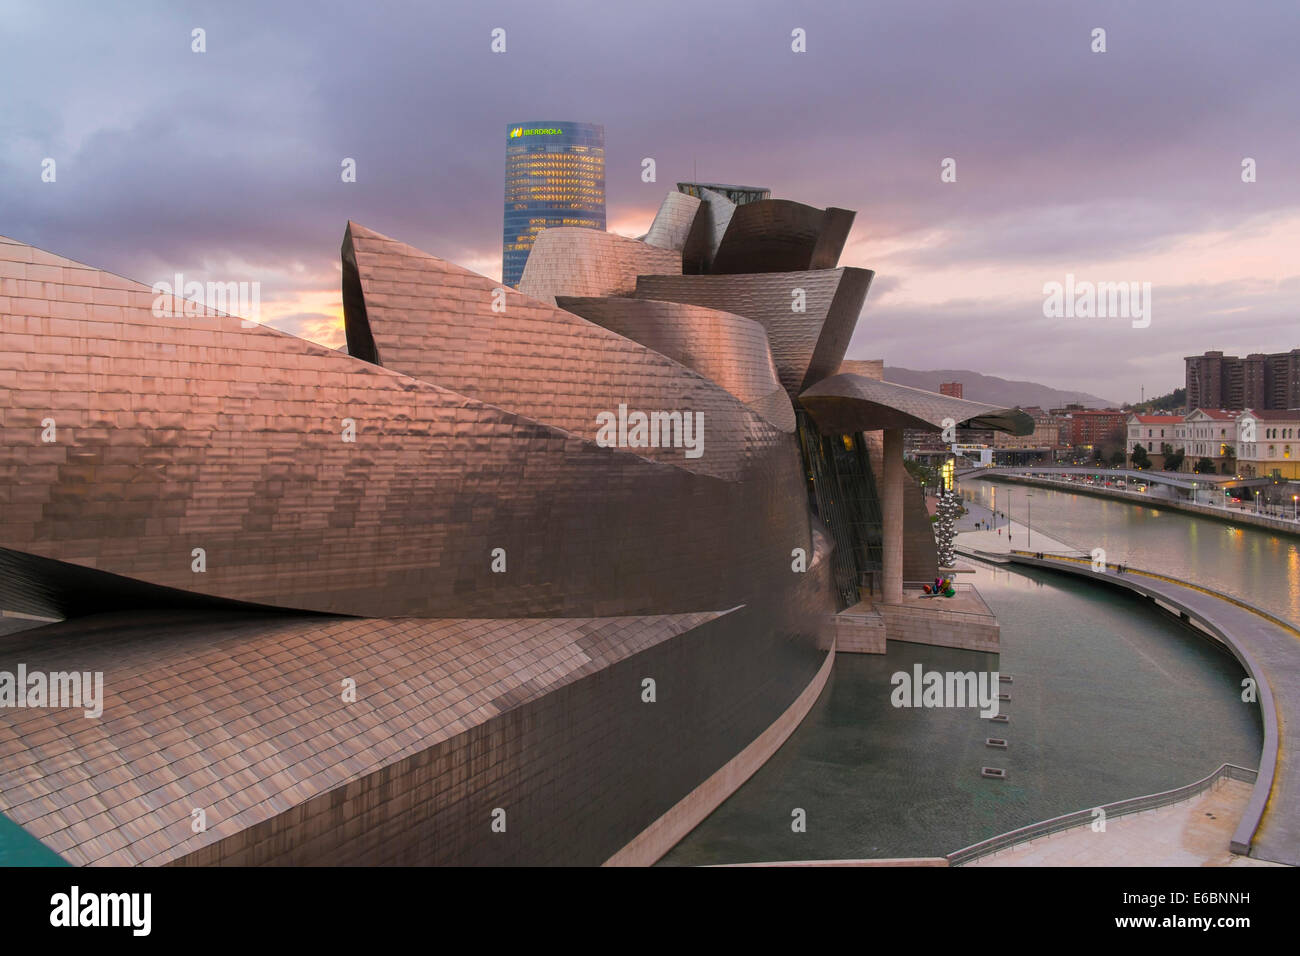 The Guggenheim Museum, designed by Frank Gehry, Bilbao, Vizcaya Province, Basque Country, Spain Stock Photo